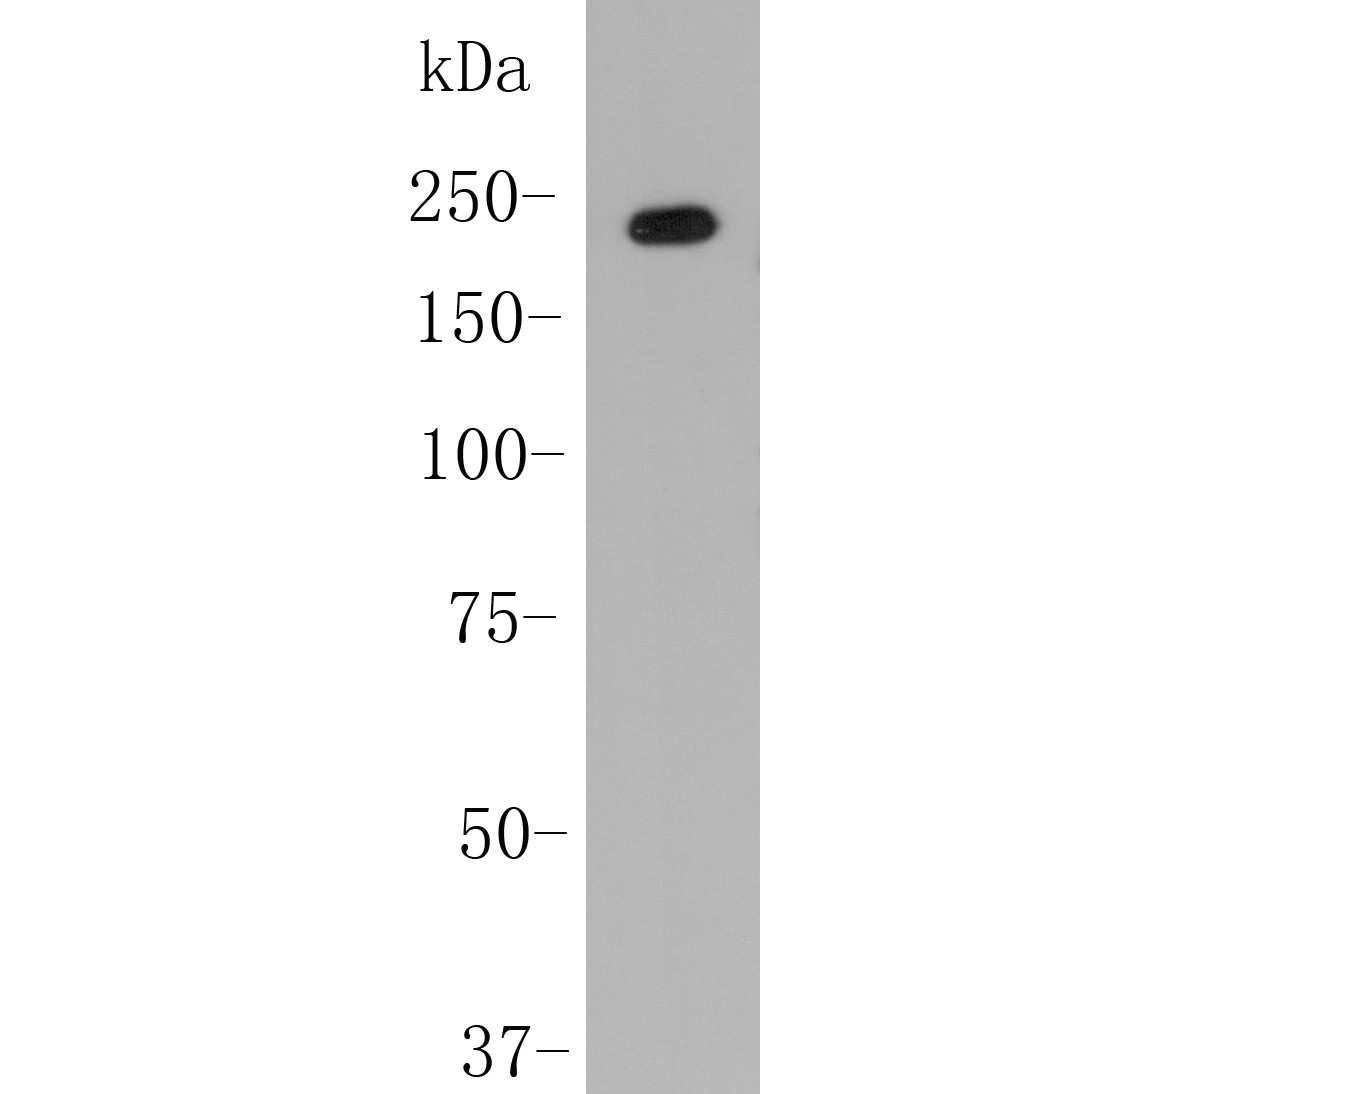 Western blot analysis of Kidins220 on K562 cell lysate. Proteins were transferred to a PVDF membrane and blocked with 5% BSA in PBS for 1 hour at room temperature. The primary antibody (M0910-4, 1/500) was used in 5% BSA at room temperature for 2 hours. Goat Anti-Mouse IgG - HRP Secondary Antibody (HA1006) at 1:5,000 dilution was used for 1 hour at room temperature.